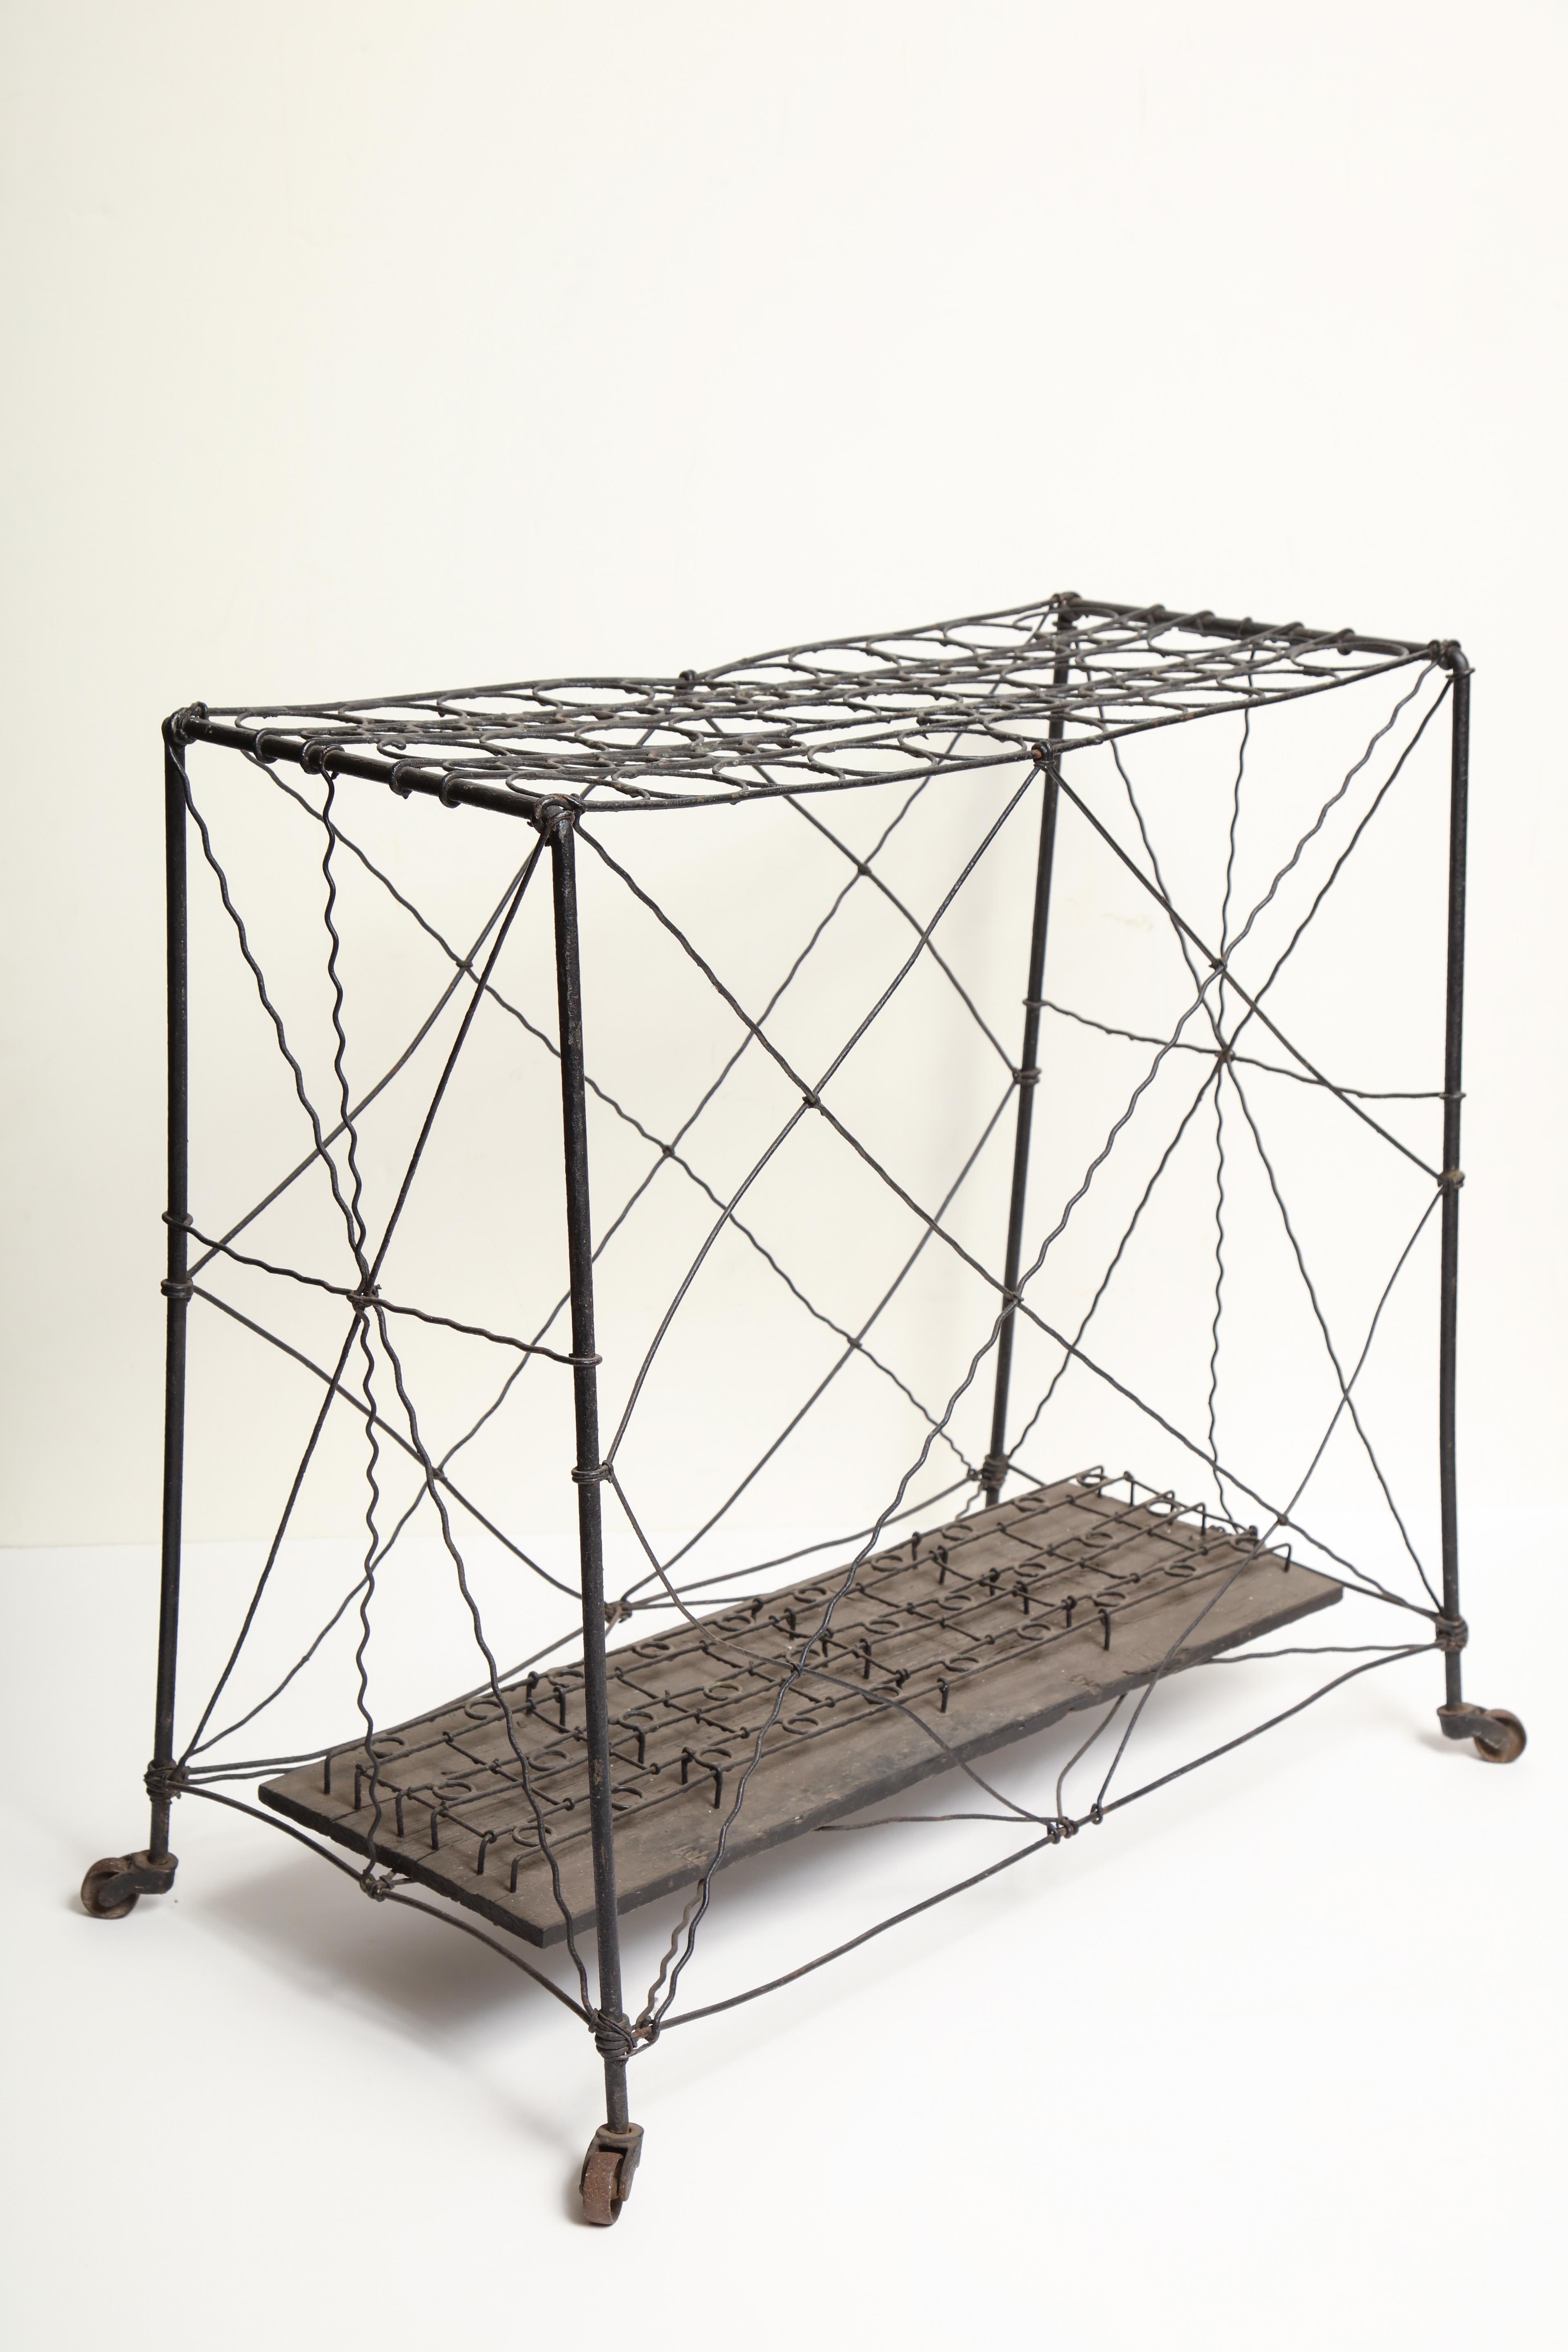 Late 19th century, wire cane rack.